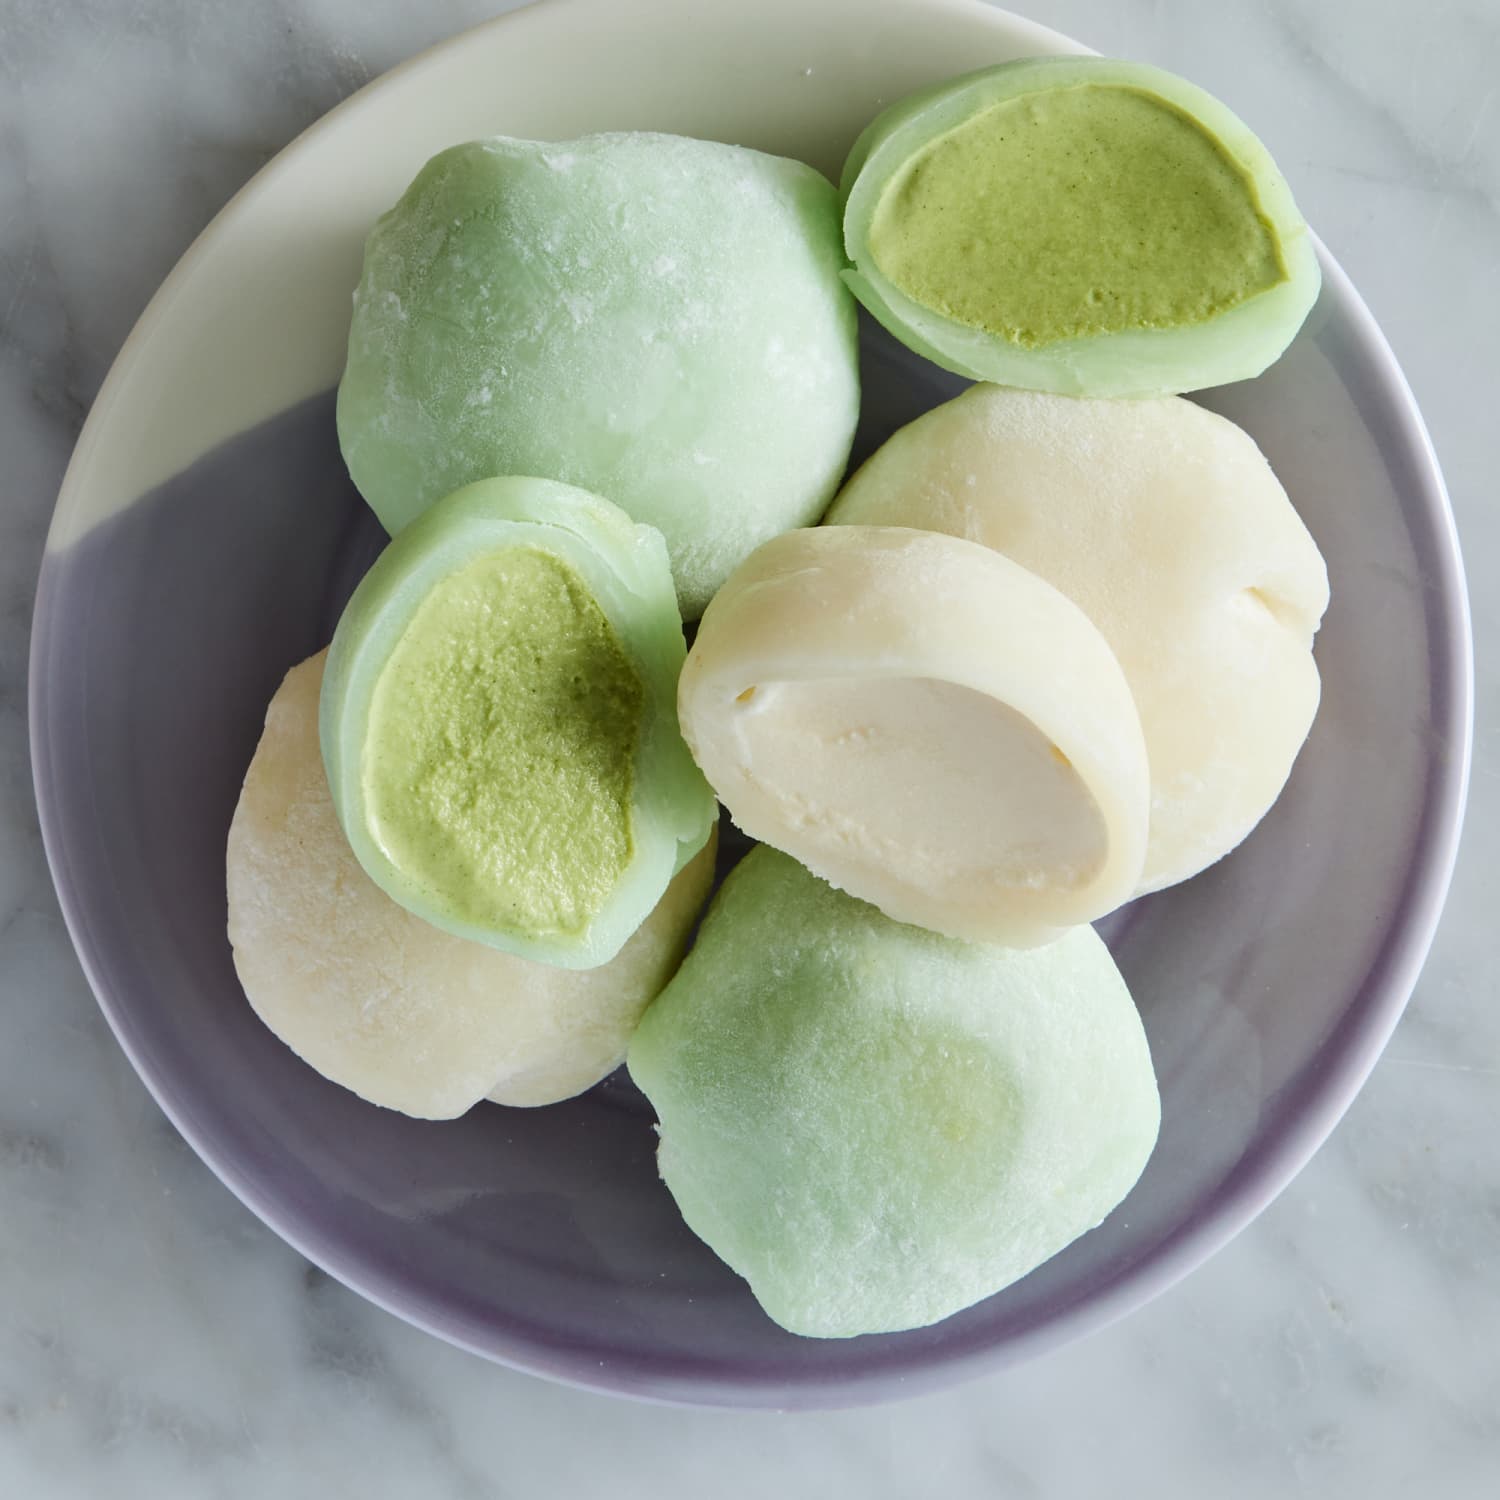 Easy-to-use mochi-making kitchen gadget is here to help you create  home-made Japanese sweets